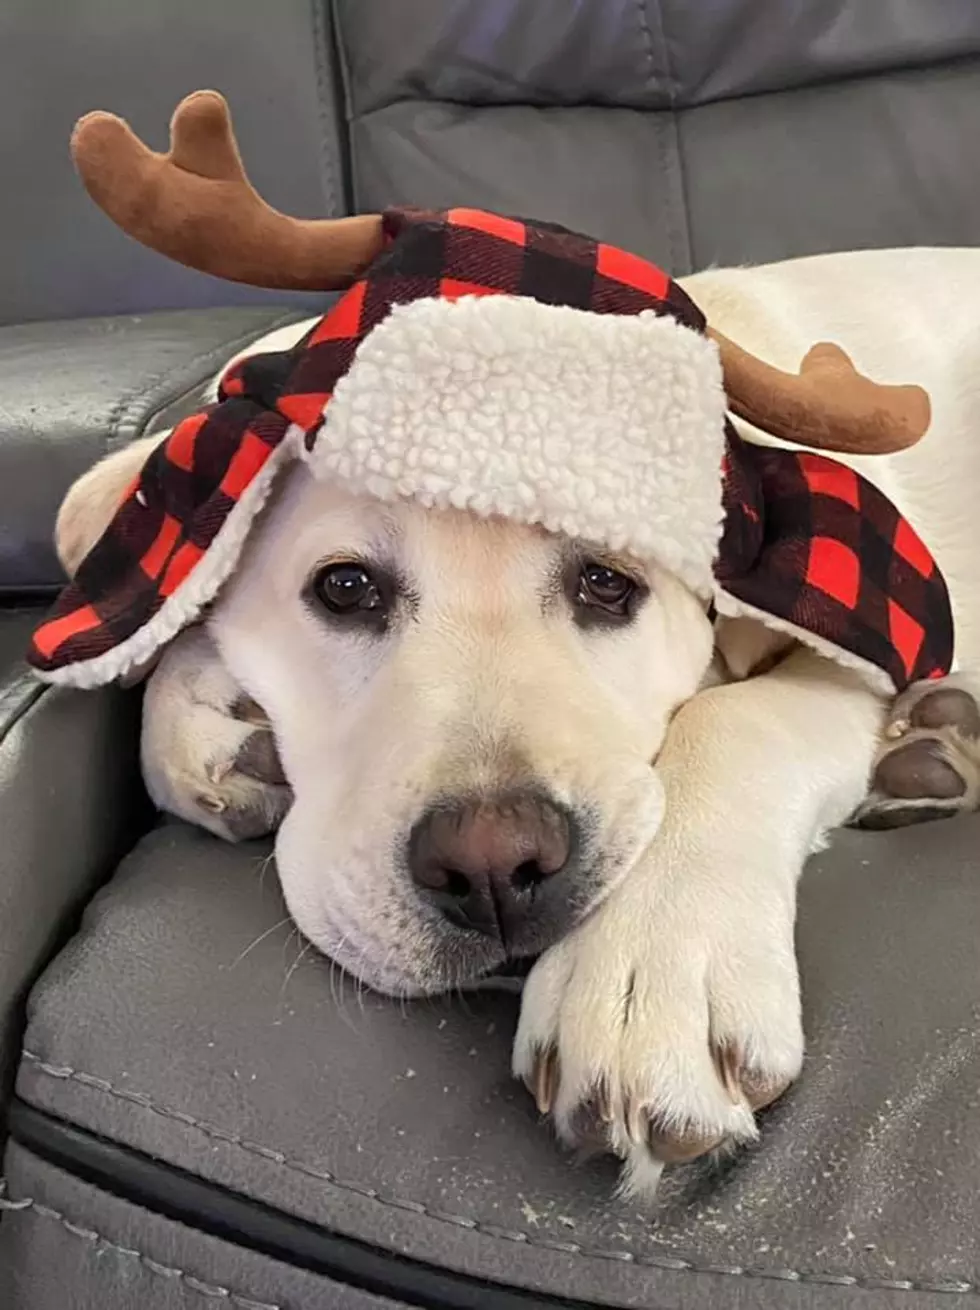 10 Maine Pets Decked Out For the Holidays - Part II